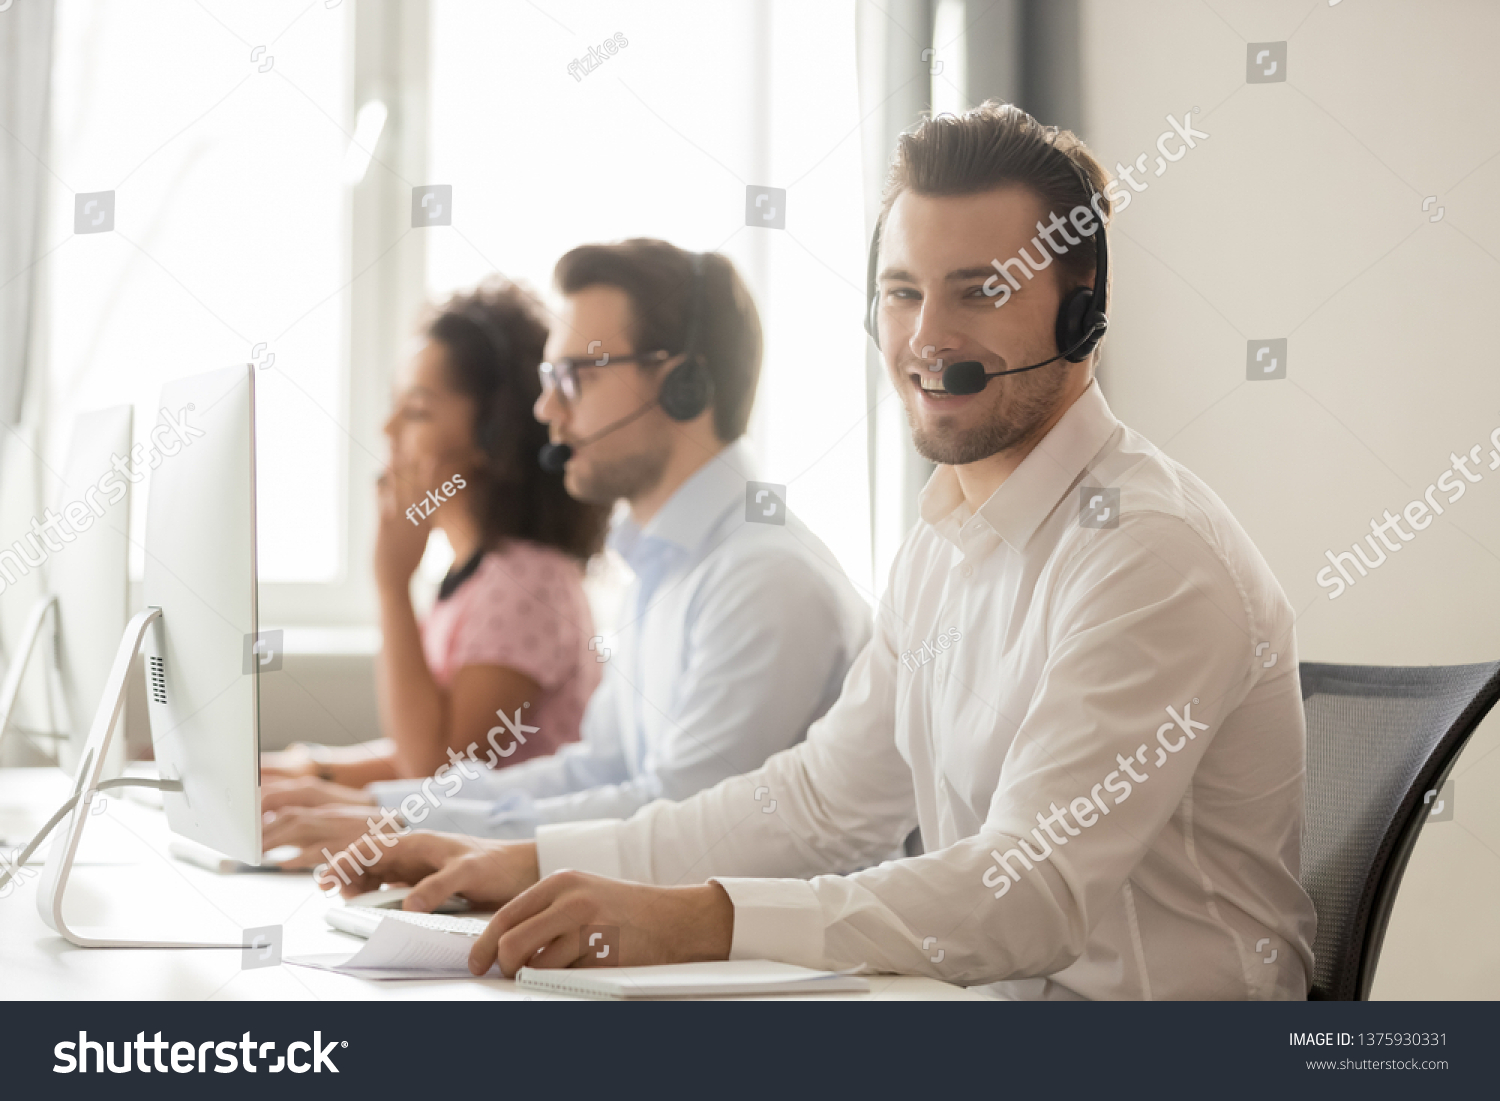 Three diverse workers service phone call center operators working wearing headset use pc, focus on smiling team member looks at camera, support everyday, opportunity to grow and develop career concept #1375930331